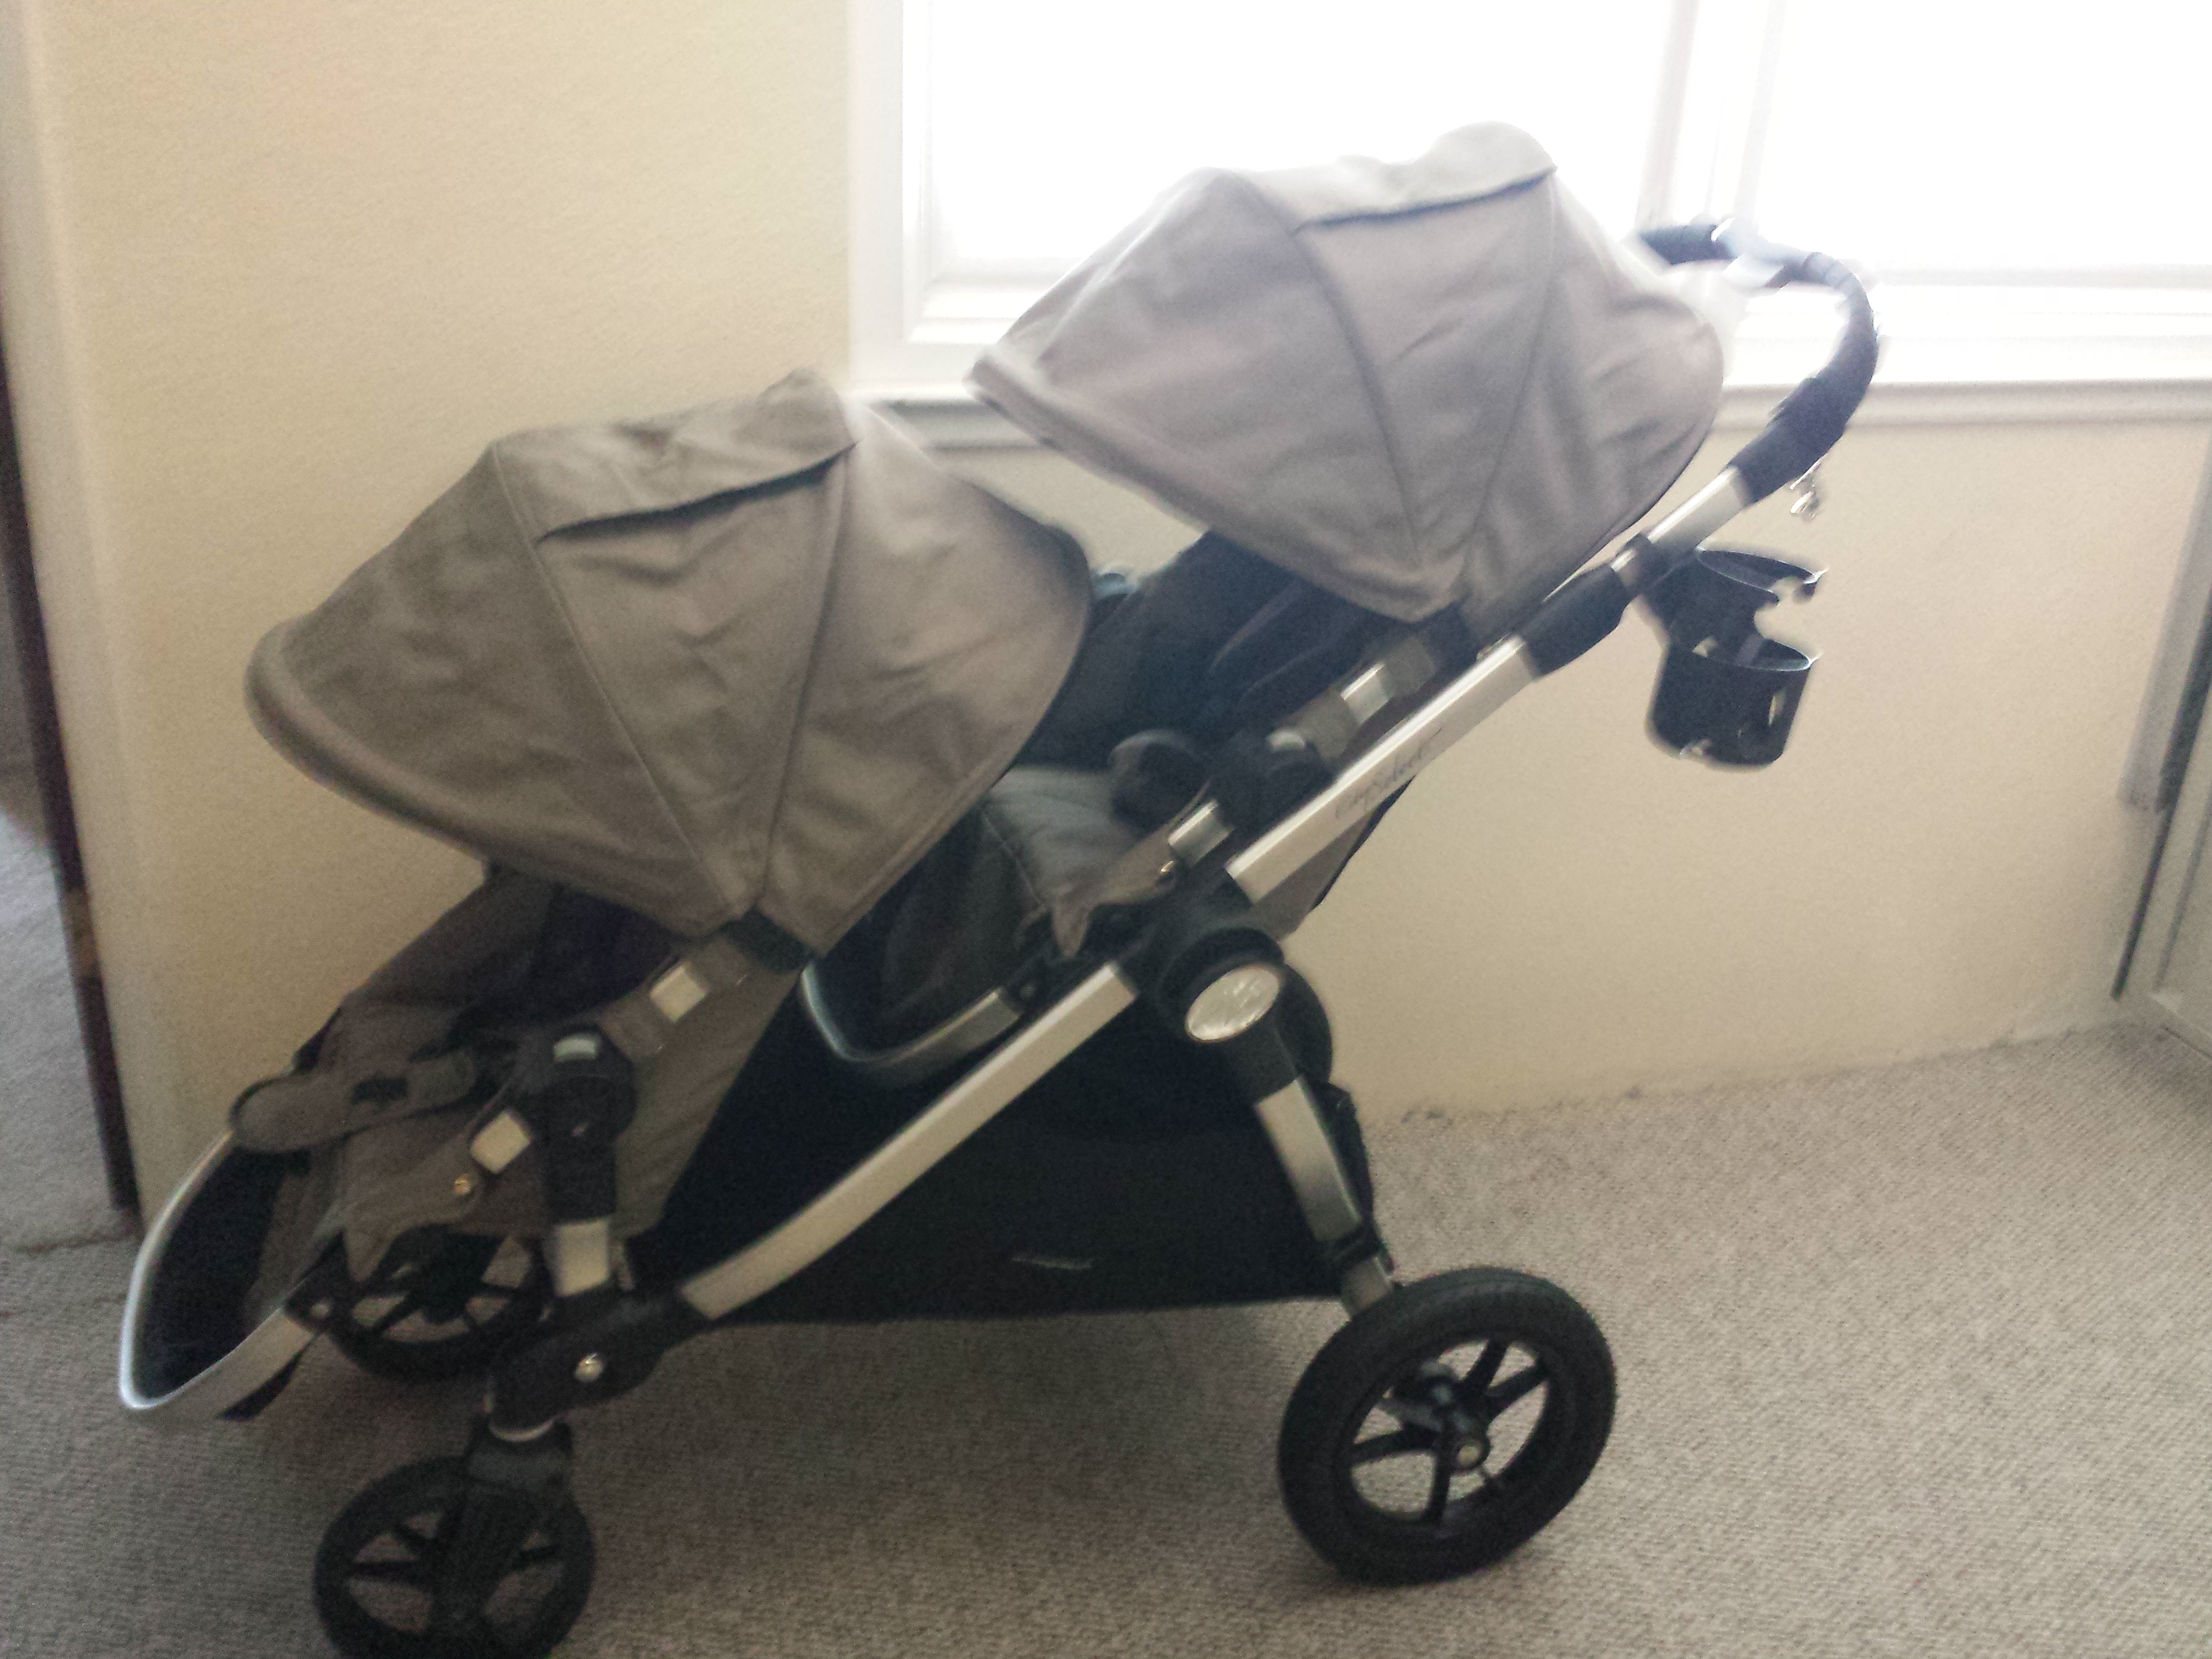 used city select stroller